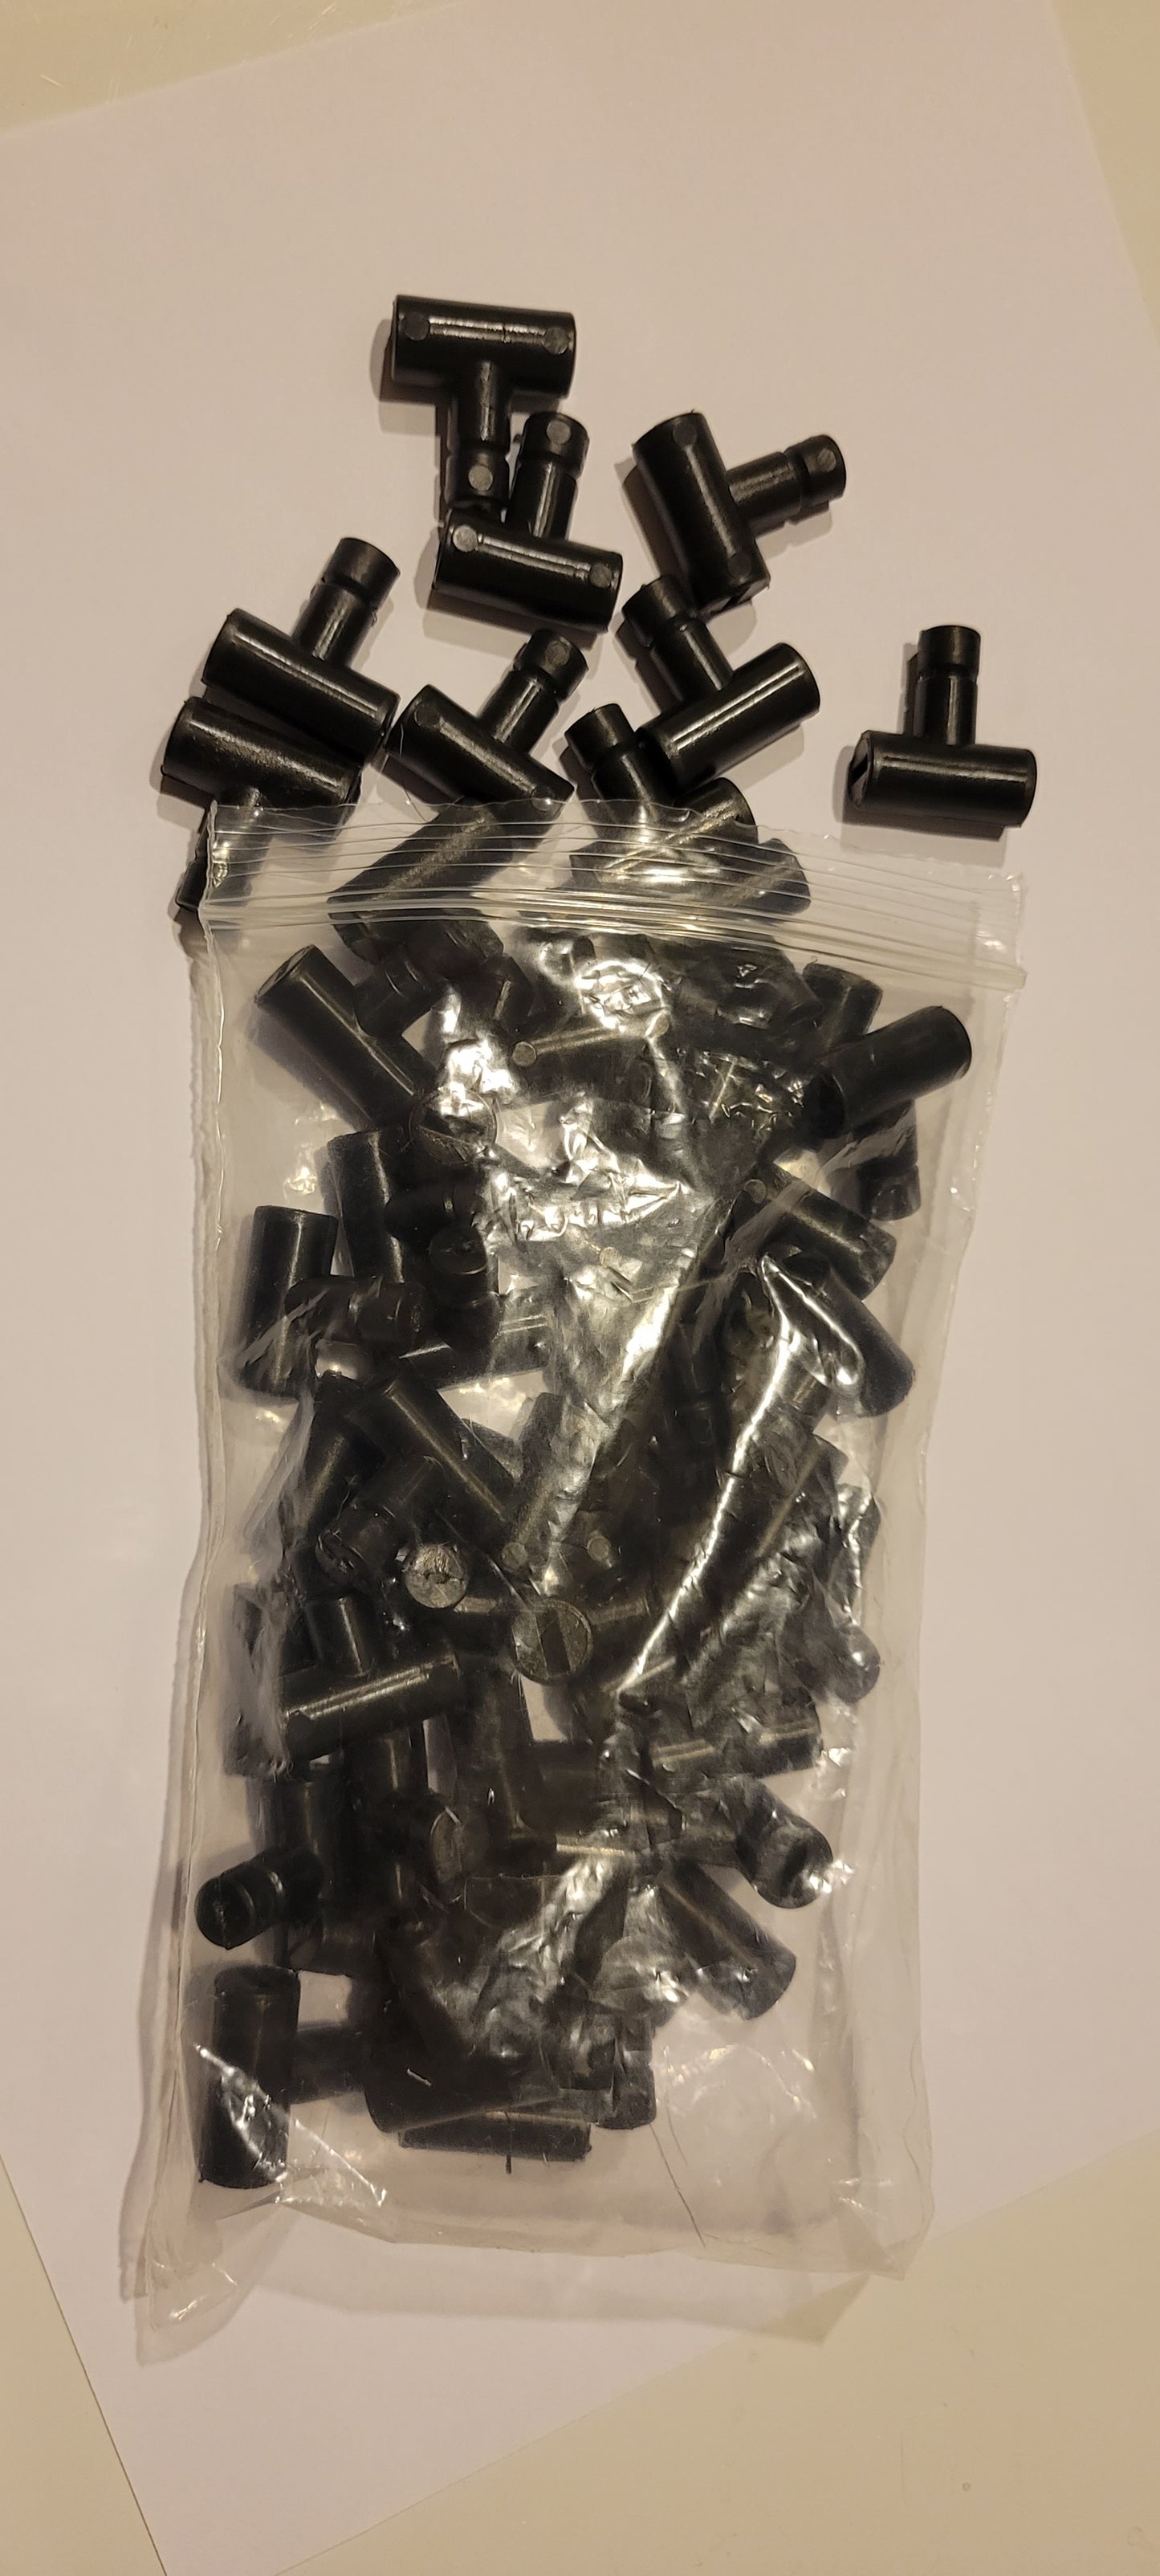 T-Bolts for parking barrier gate arms (50 pieces)